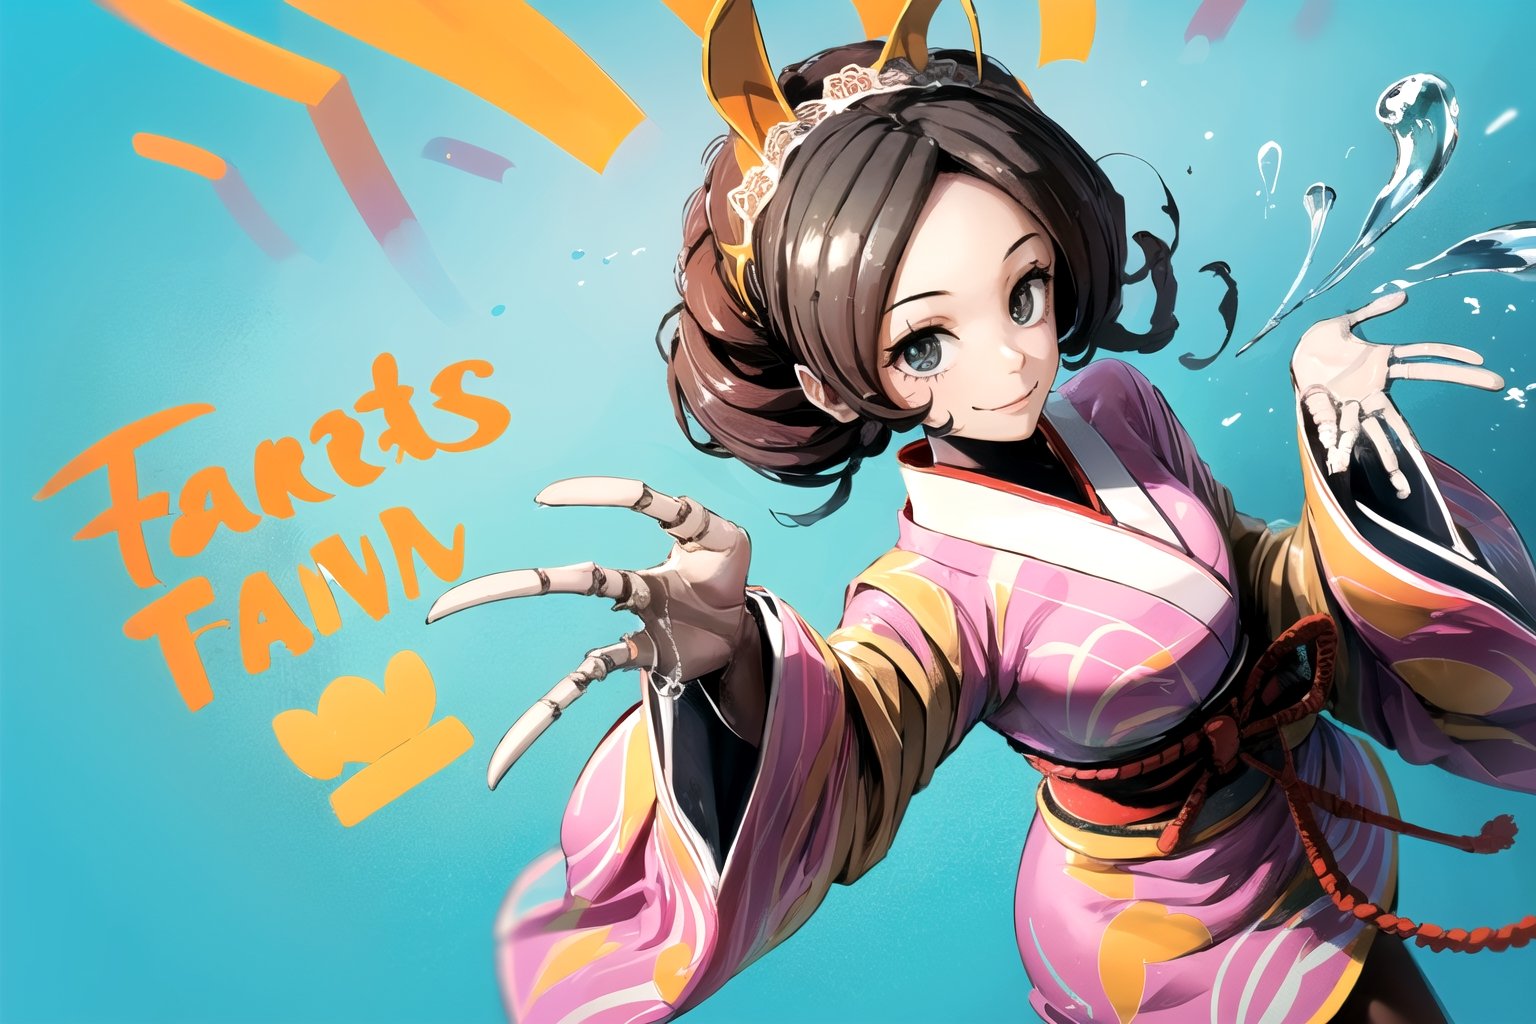 //Quality, (masterpiece), (best quality), 8k illustration,
//Character,1girl, solo, , , adult female, entoma, skeleton hands, bone hands, hone arms
//Fashion,
//Others,
,Songkran Festival, Songkran day, water splash, water festival, water gun, sand castle, water bucket, golden pagoda, golden temple, festival flags, effect of flowing water, colorful style, Thailand decoration, colorful swimming glasses, Japanese outfit, colorful long sleeve, silver hands, claw hands, scar on her face